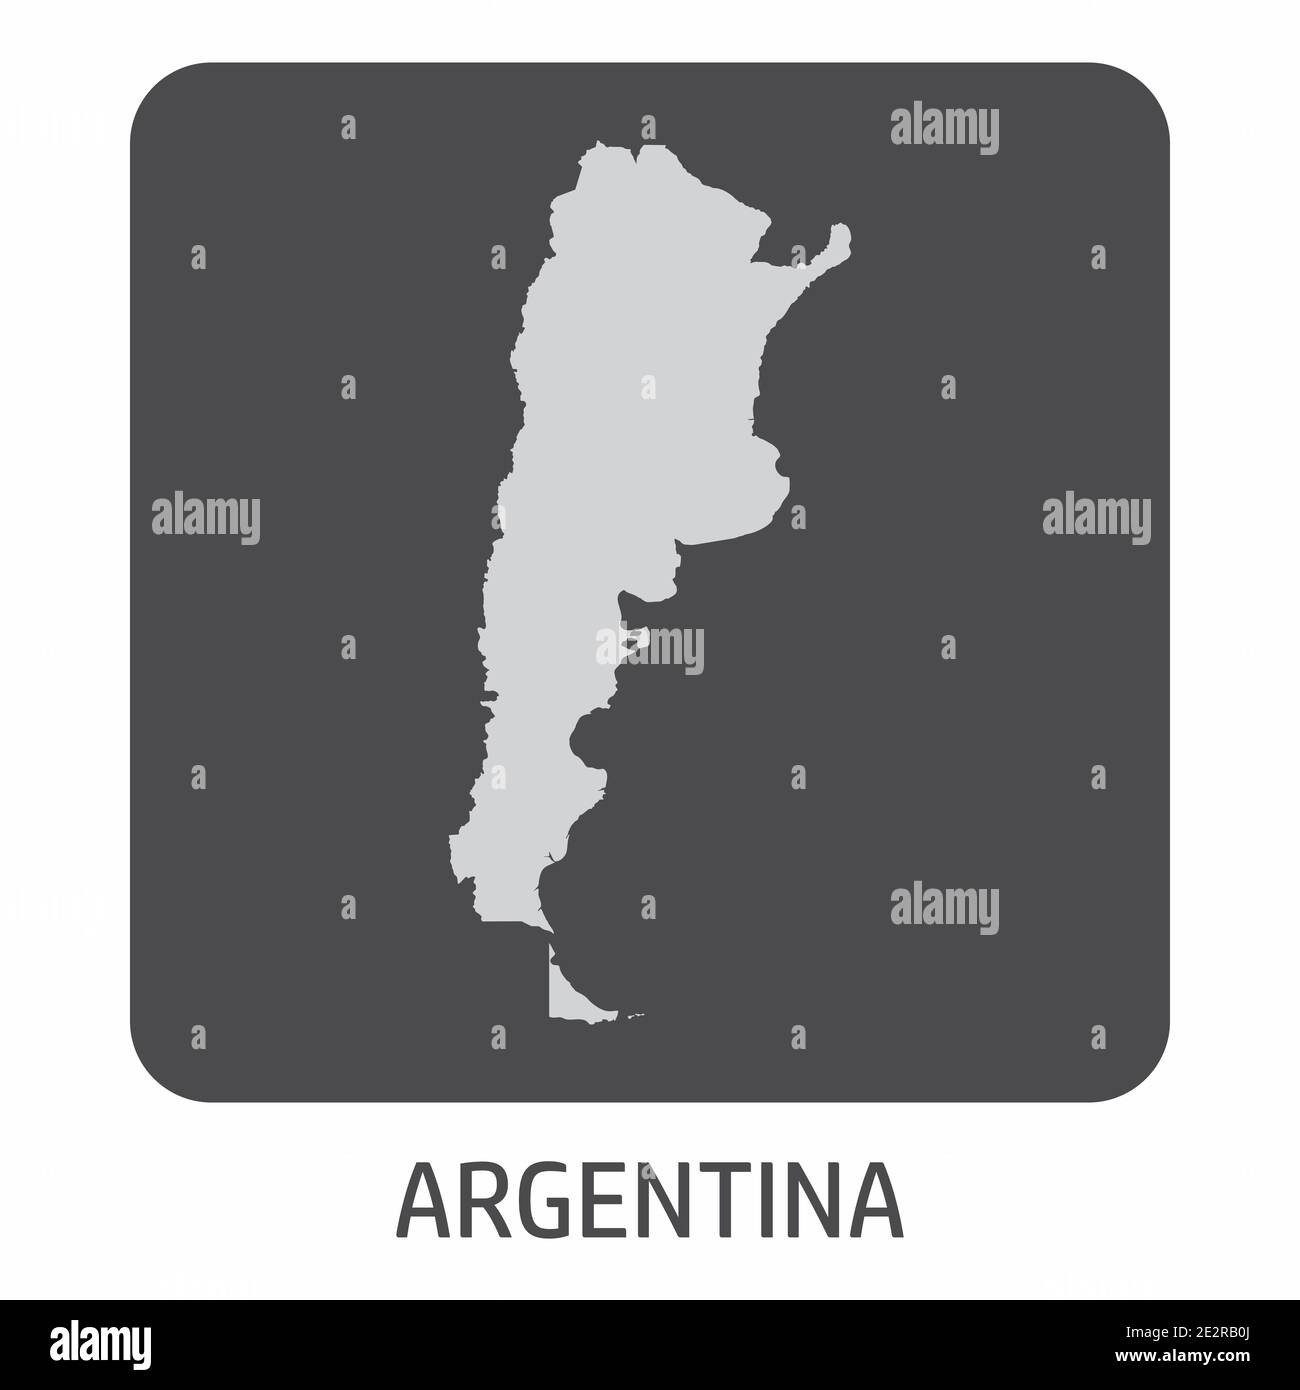 Argentina map icon Stock Vector